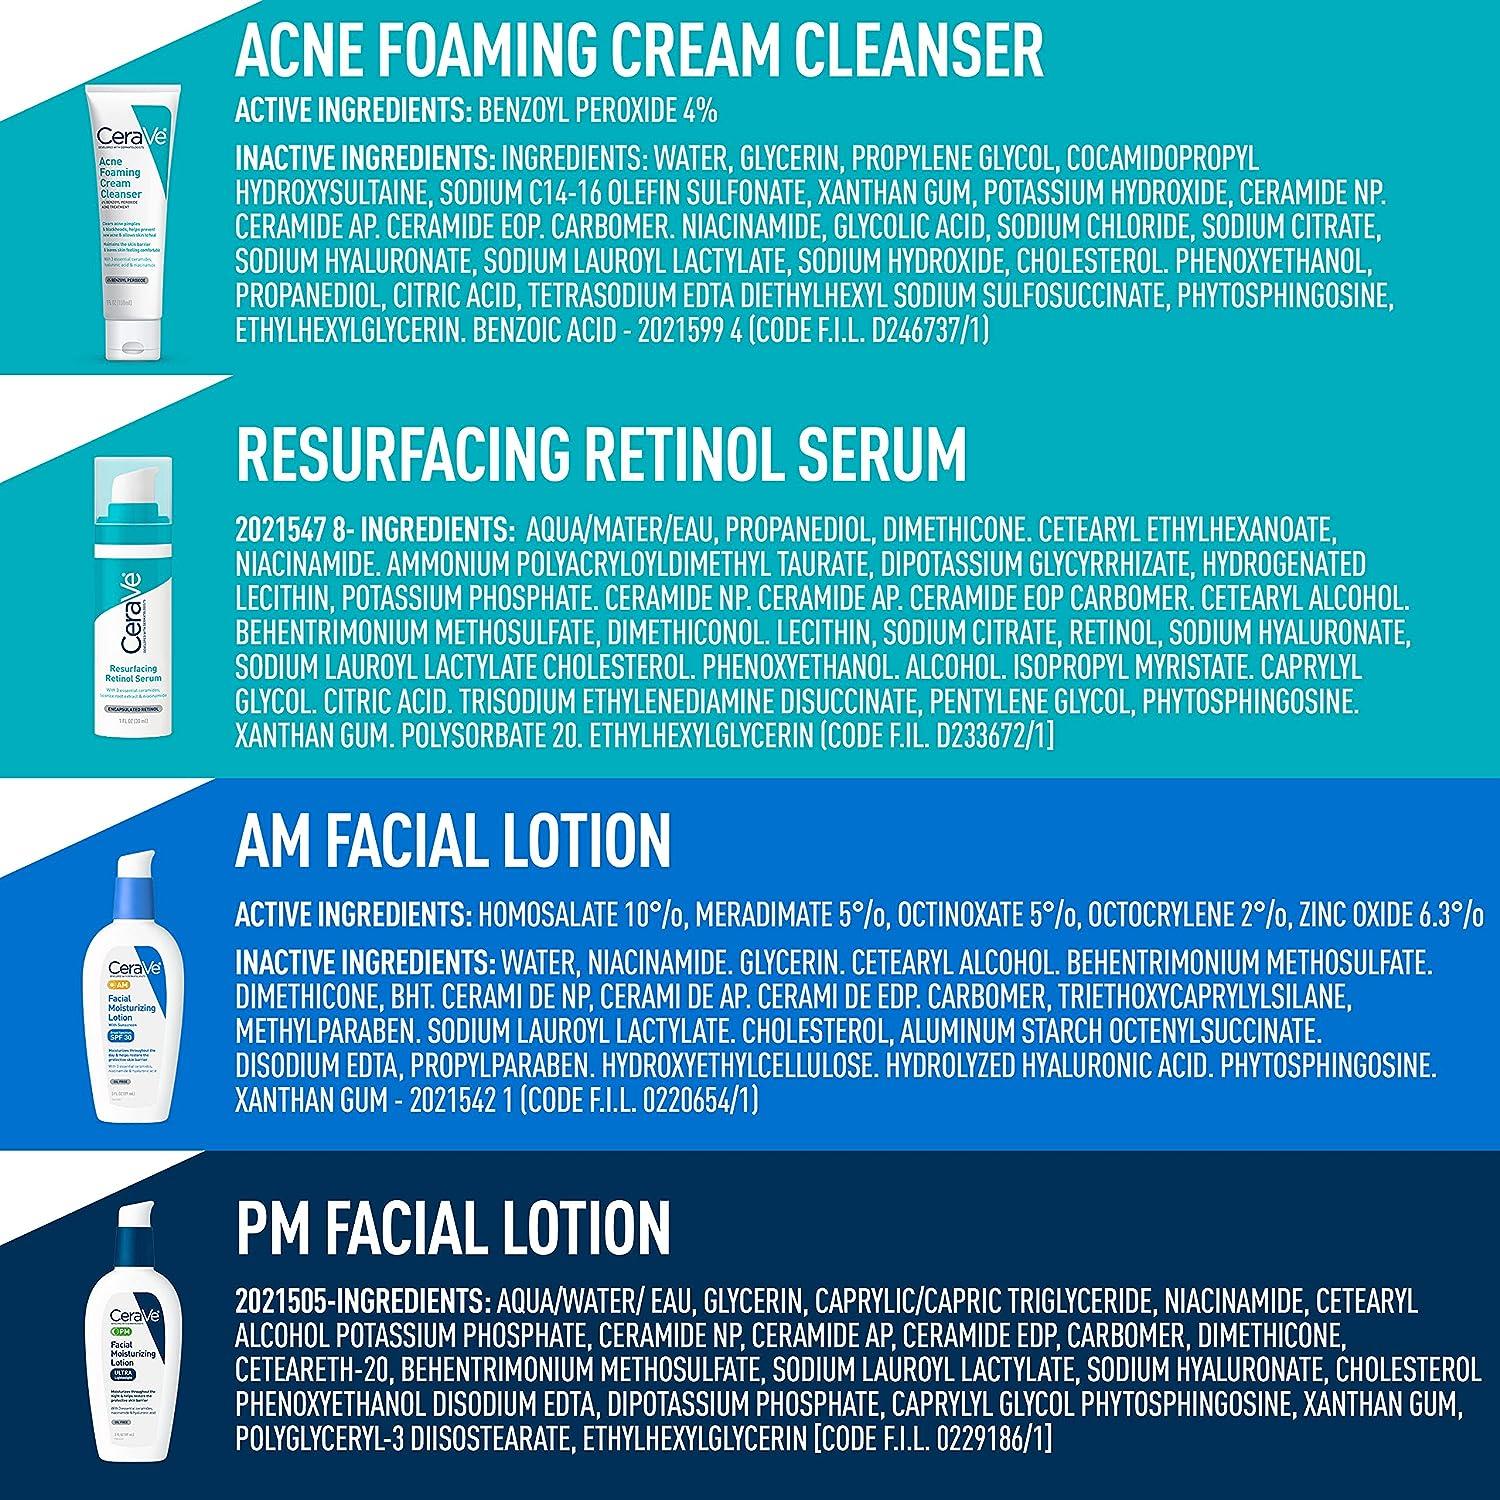 CeraVe Acne Foaming Cream Cleanser with 4% Benzoyl Peroxide, Hyaluronic  Acid, and Niacinamide, Cream to Foam Formula